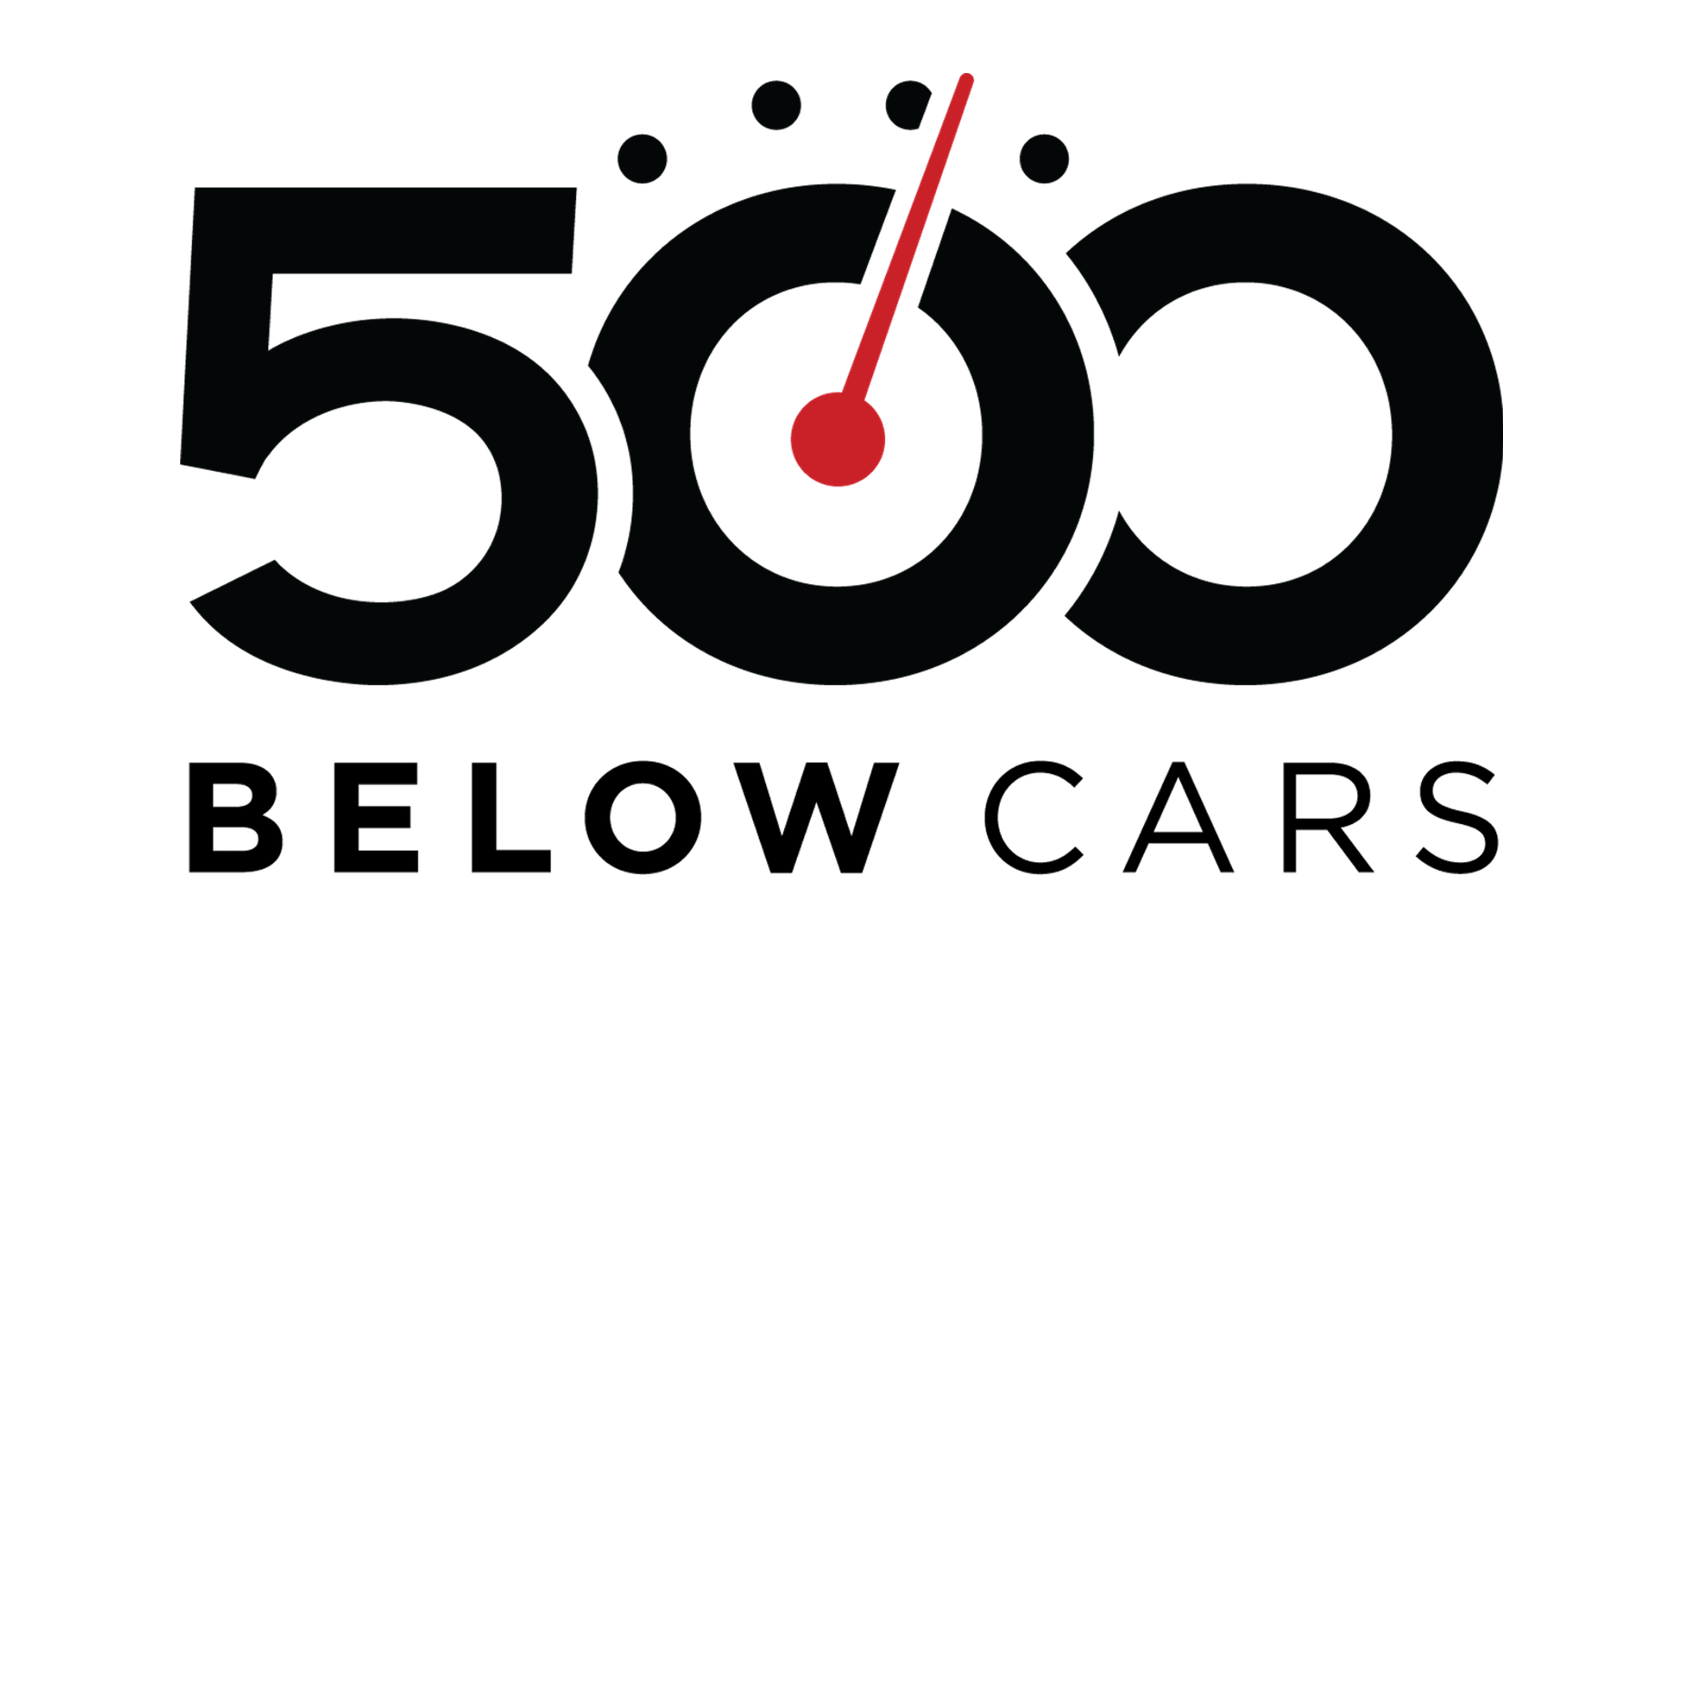 500 Logo - The Easiest Way To Own A Car - 500BelowCars.com